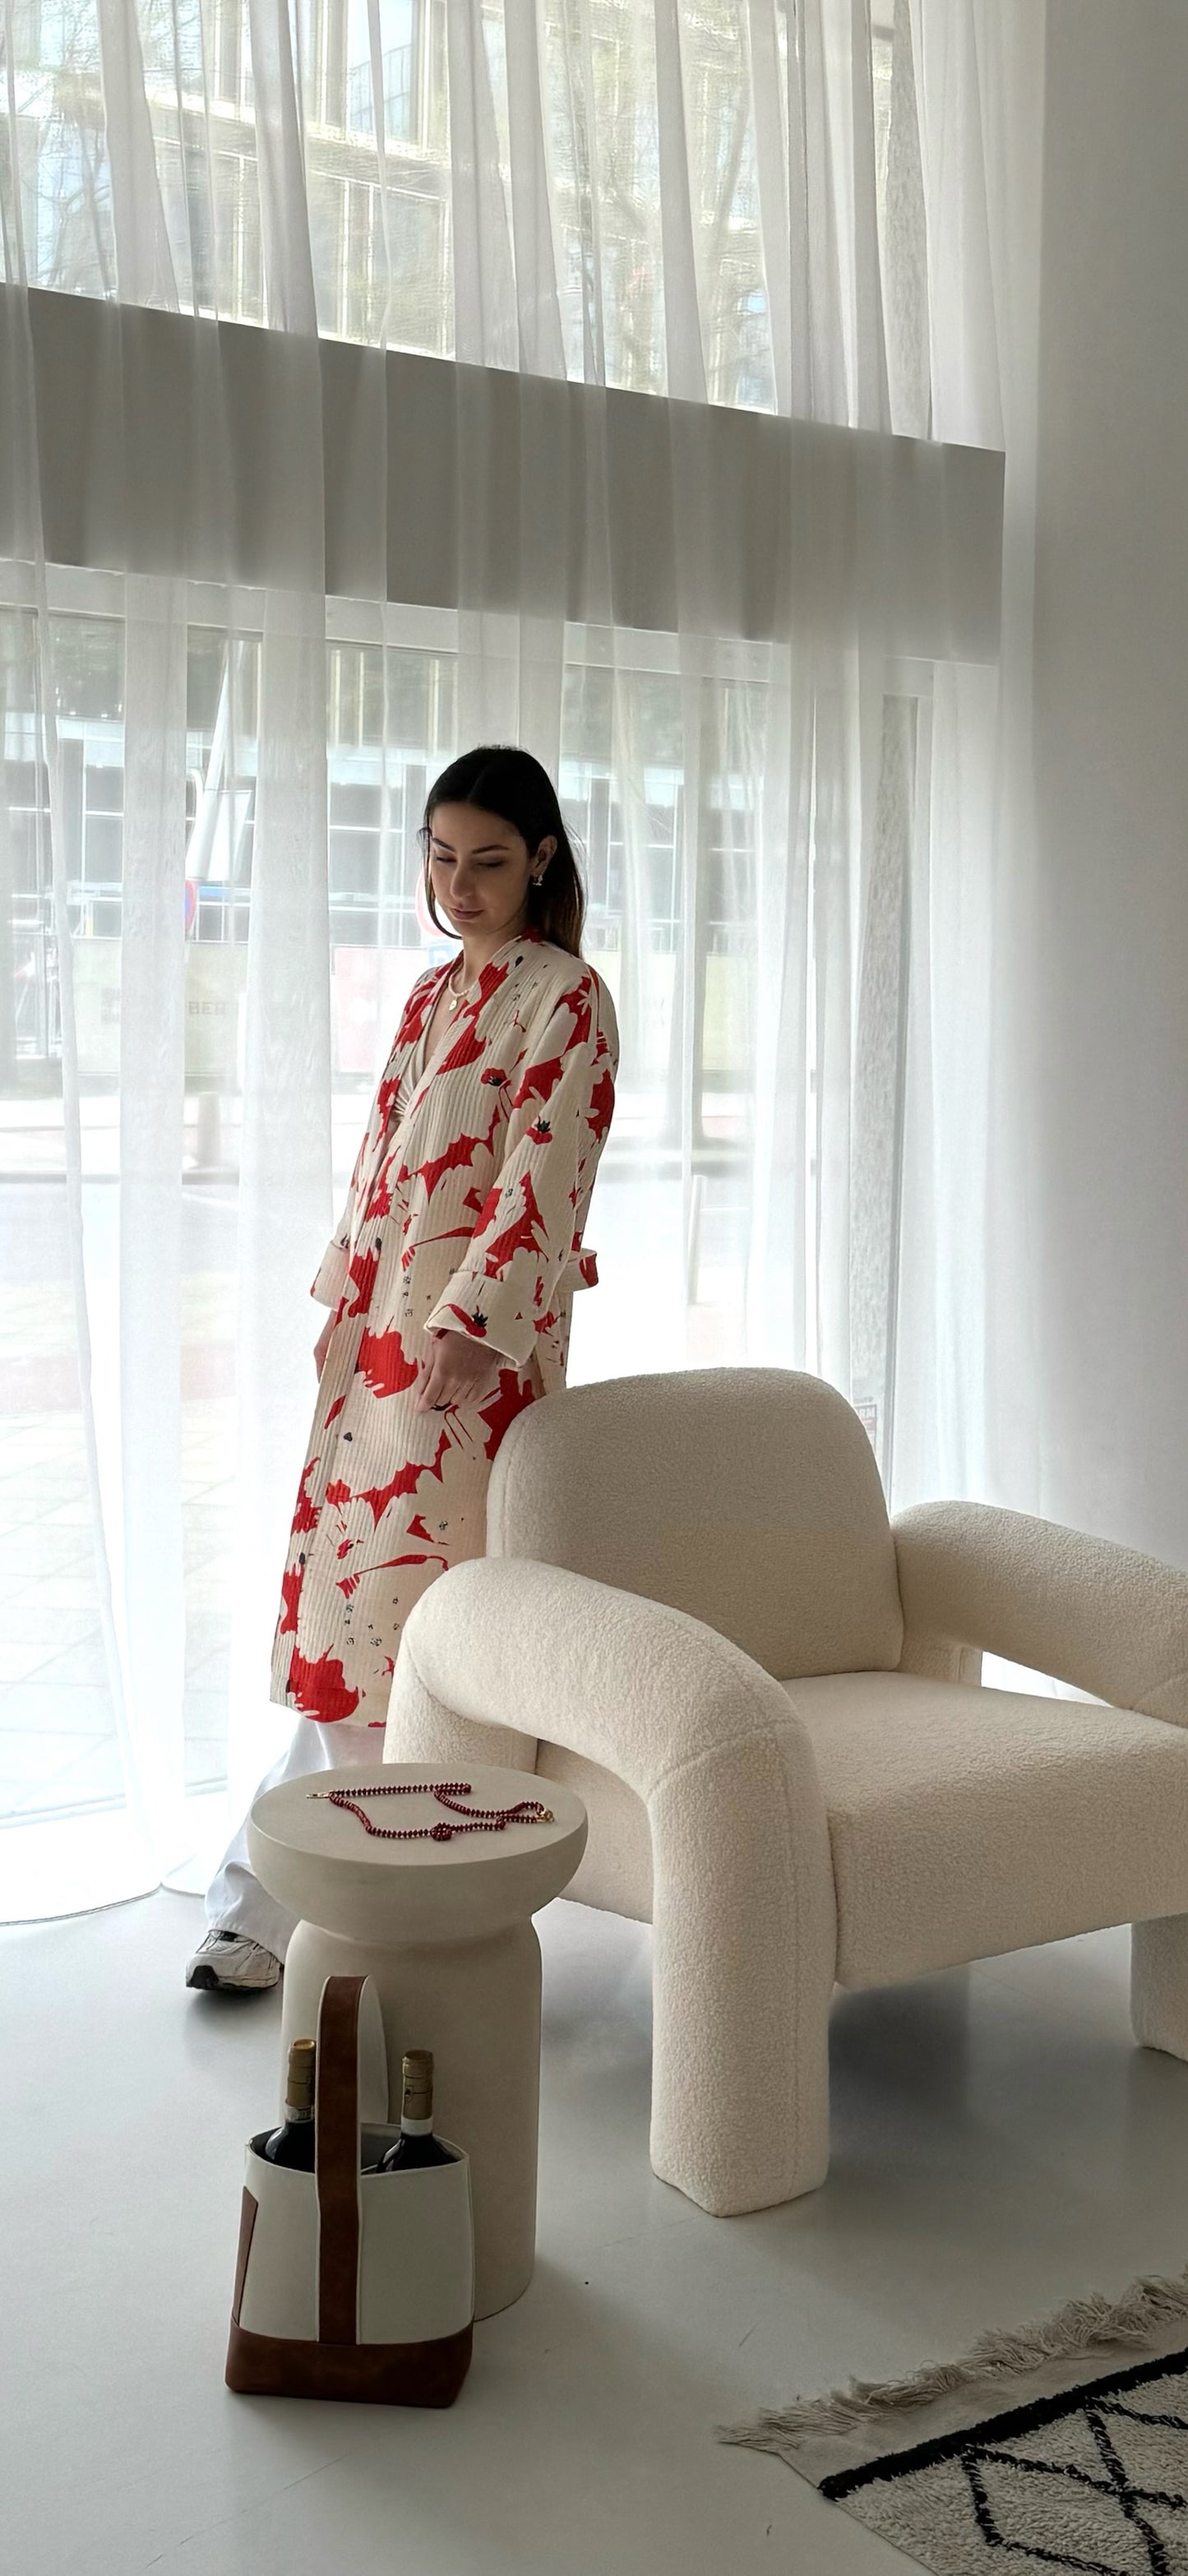 Sakura Kimono - 100% cotton with contemporary pattern in sakura red and off white, can be used as a bath or home robe but also as a jacket